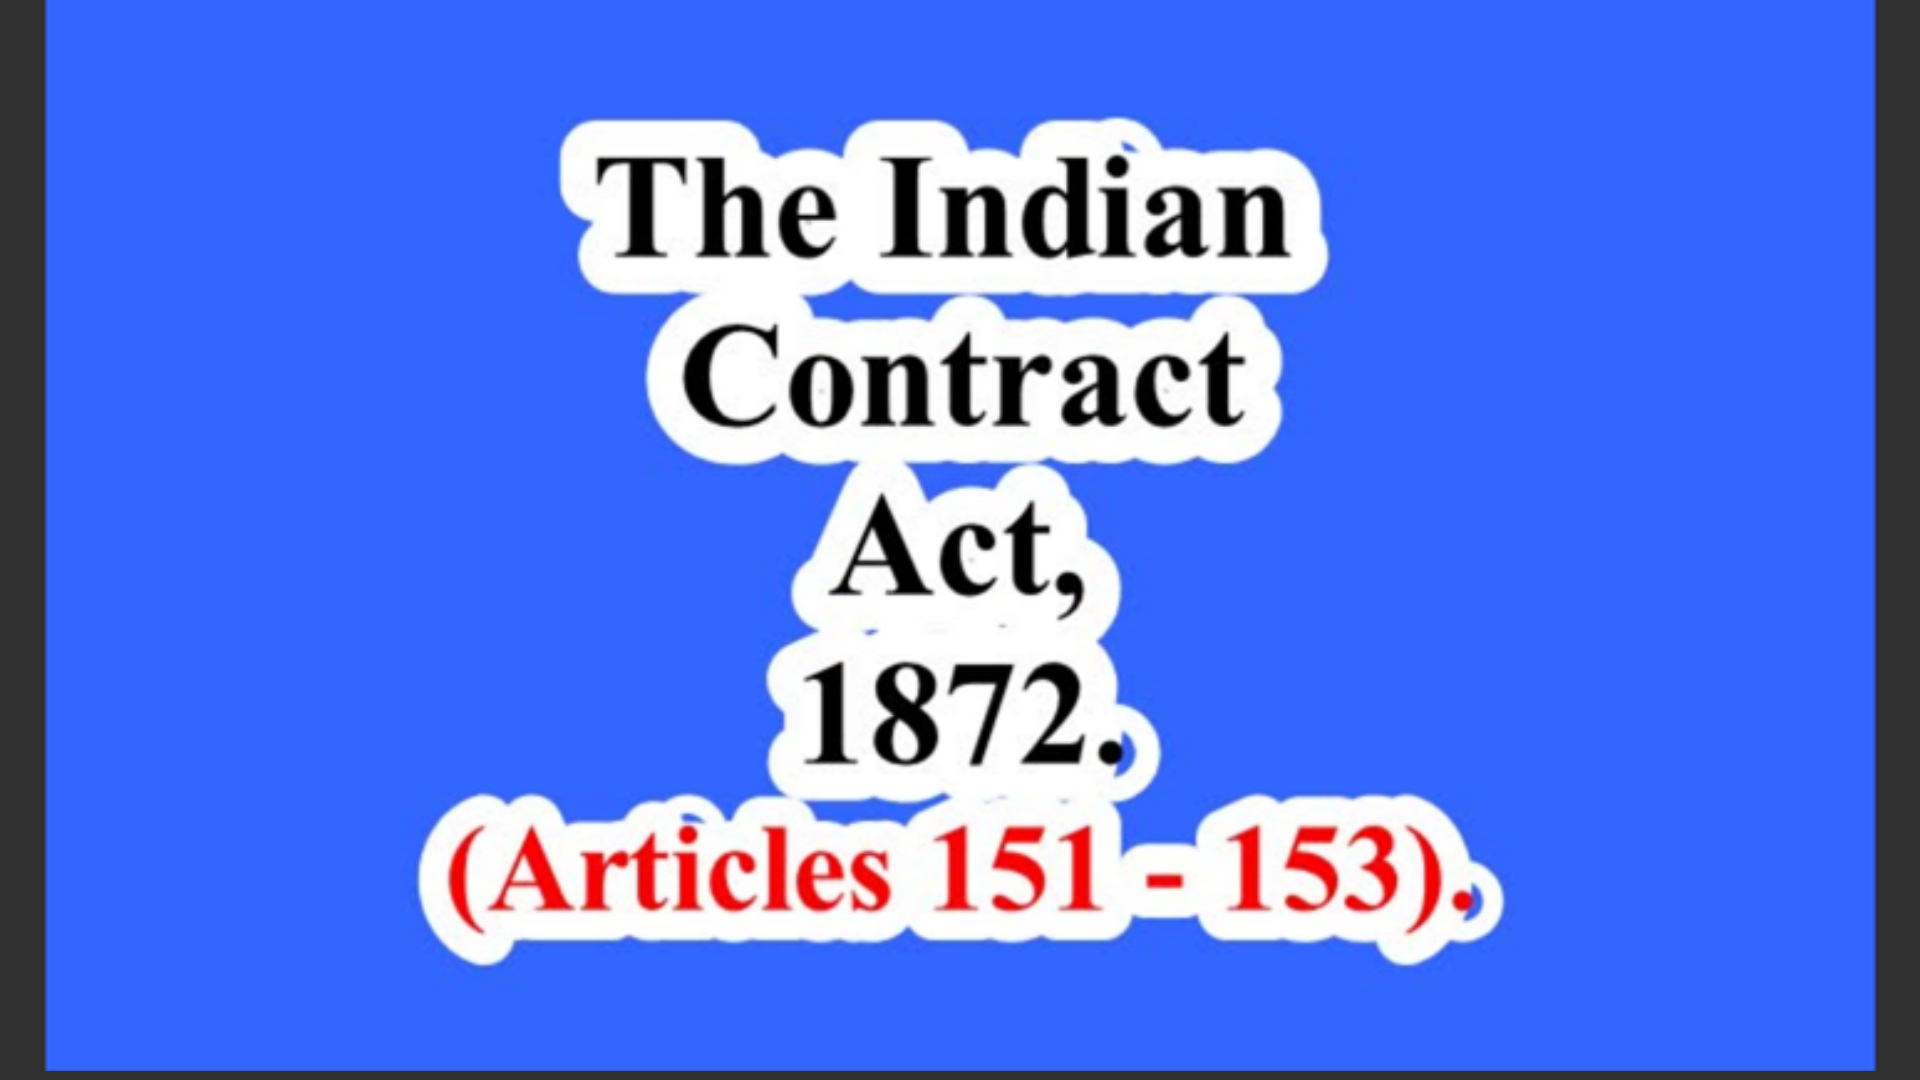 The Indian Contract Act, 1872. (Articles 151 – 153).